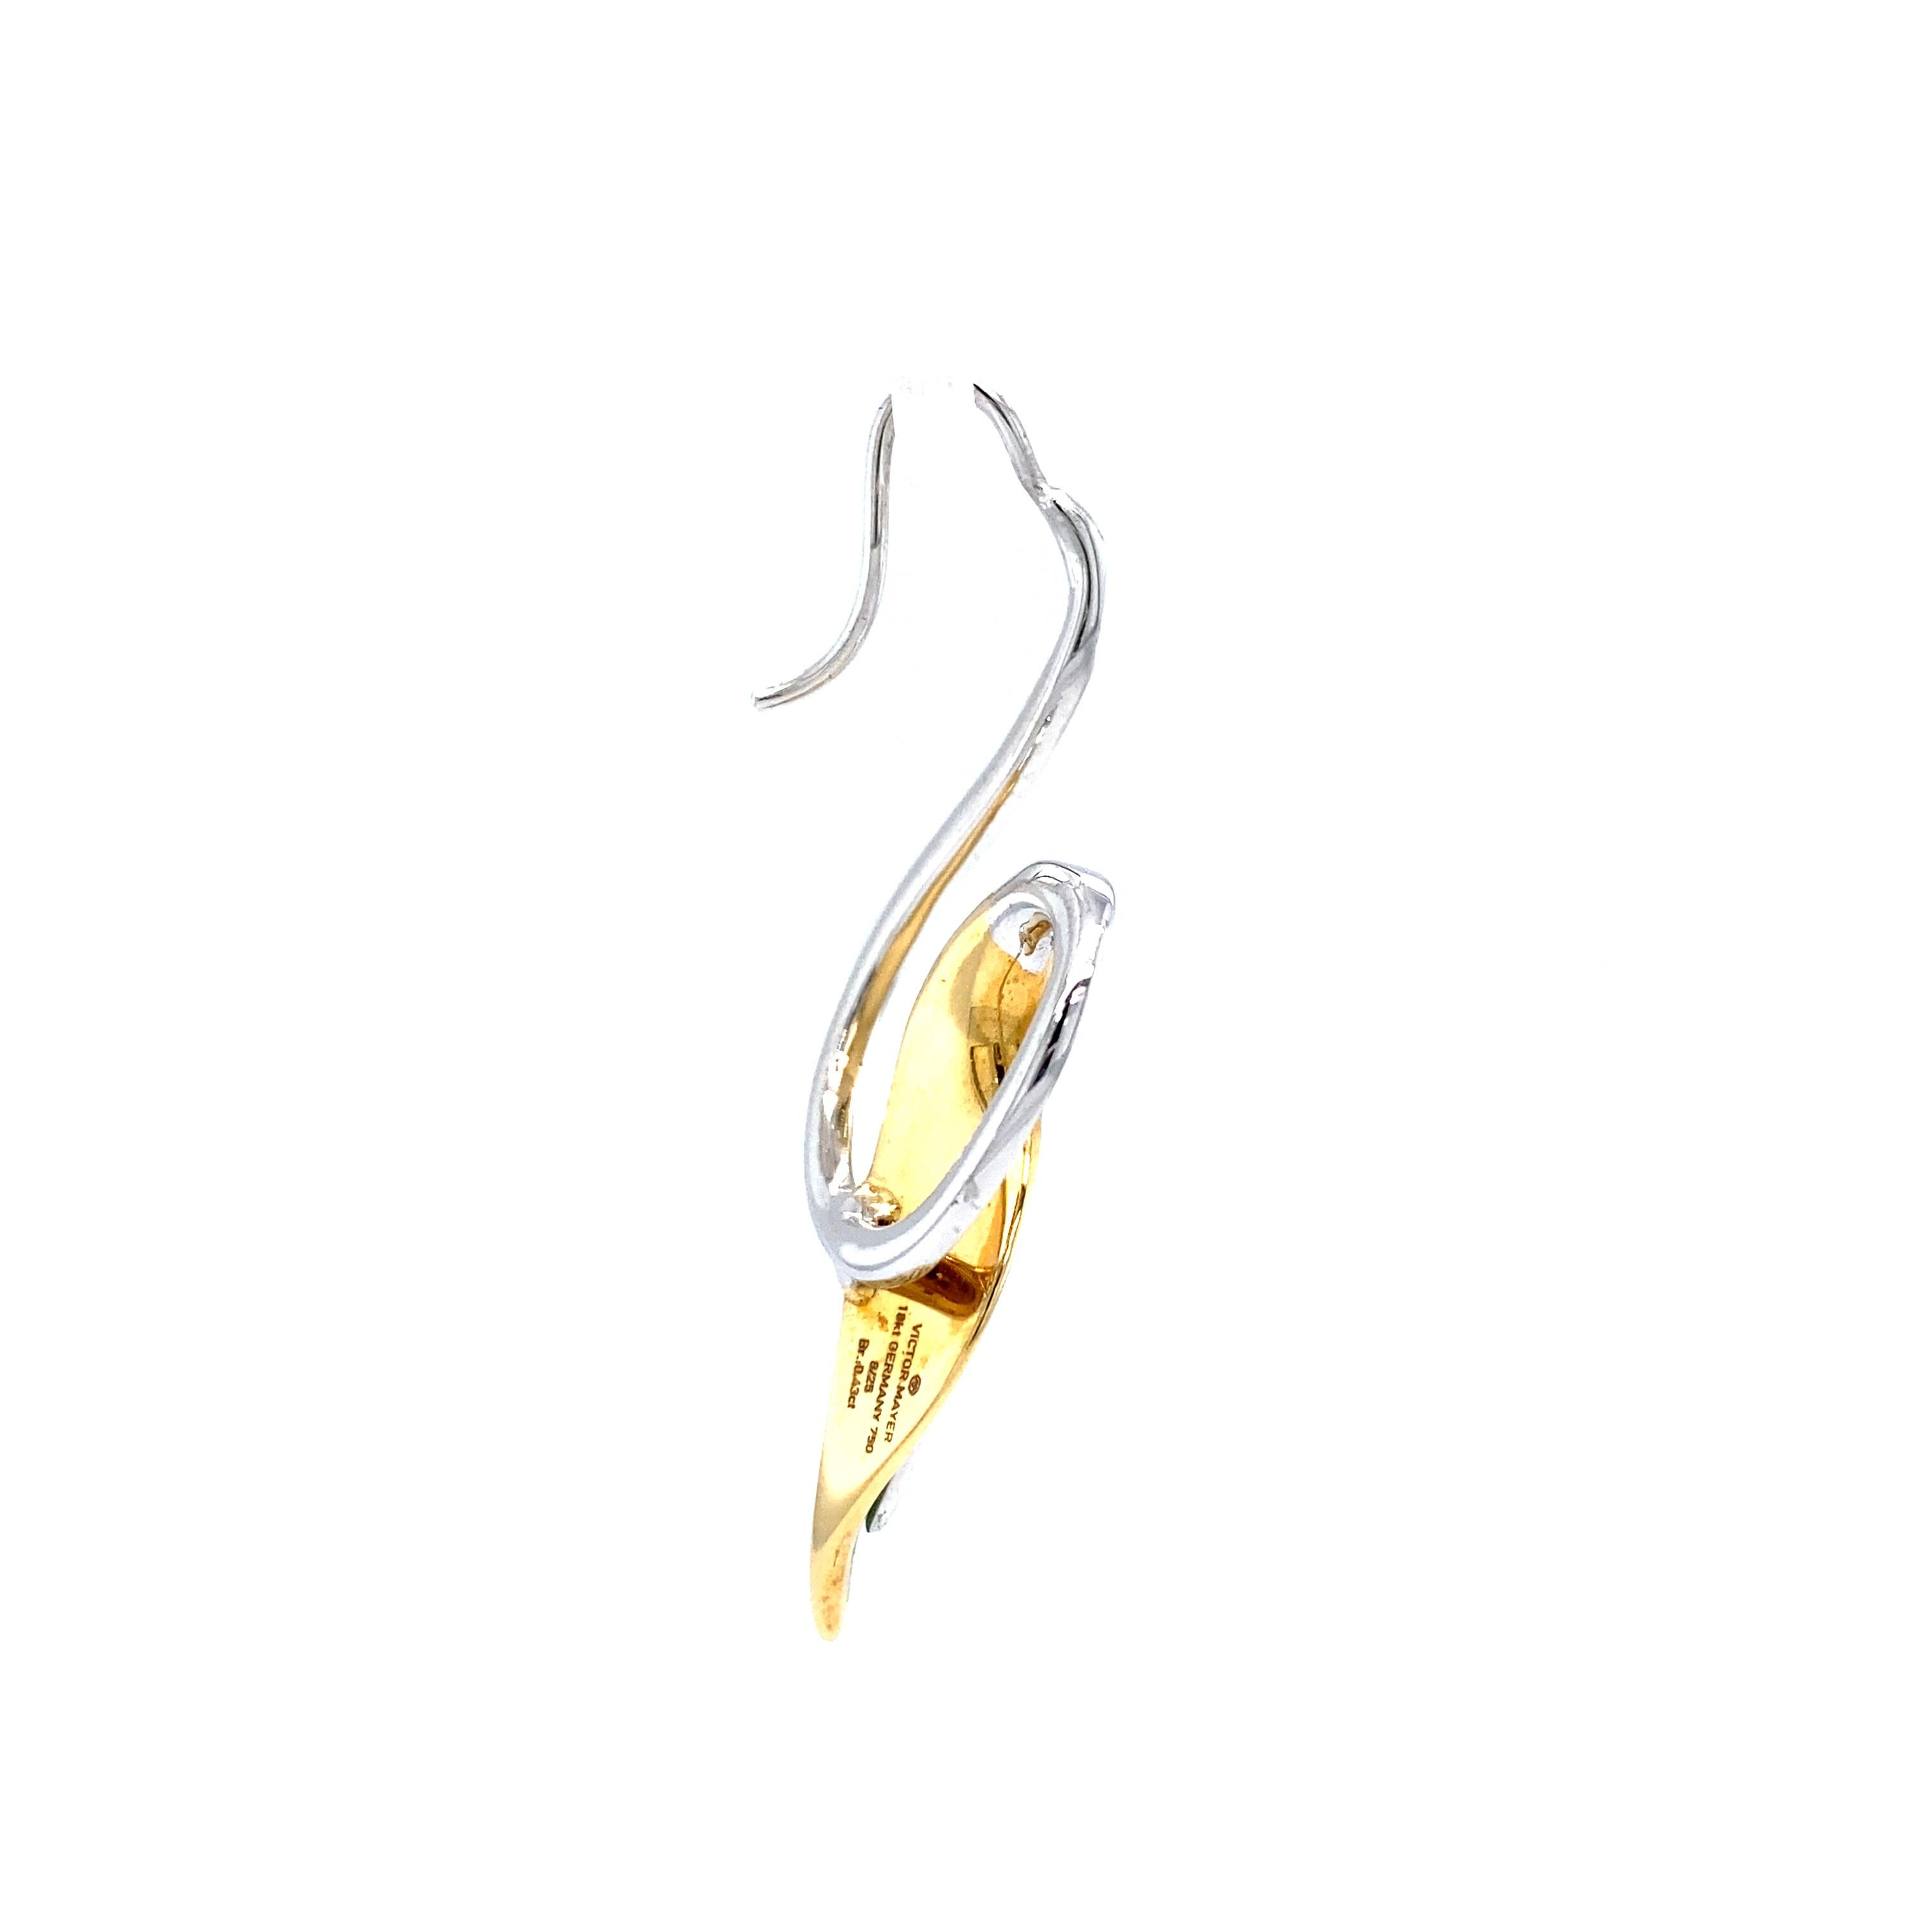 Leave Earrings 18k White Gold/Yellow Gold Turquoise Enamel 102 Diamonds 0.86 Ct For Sale 1